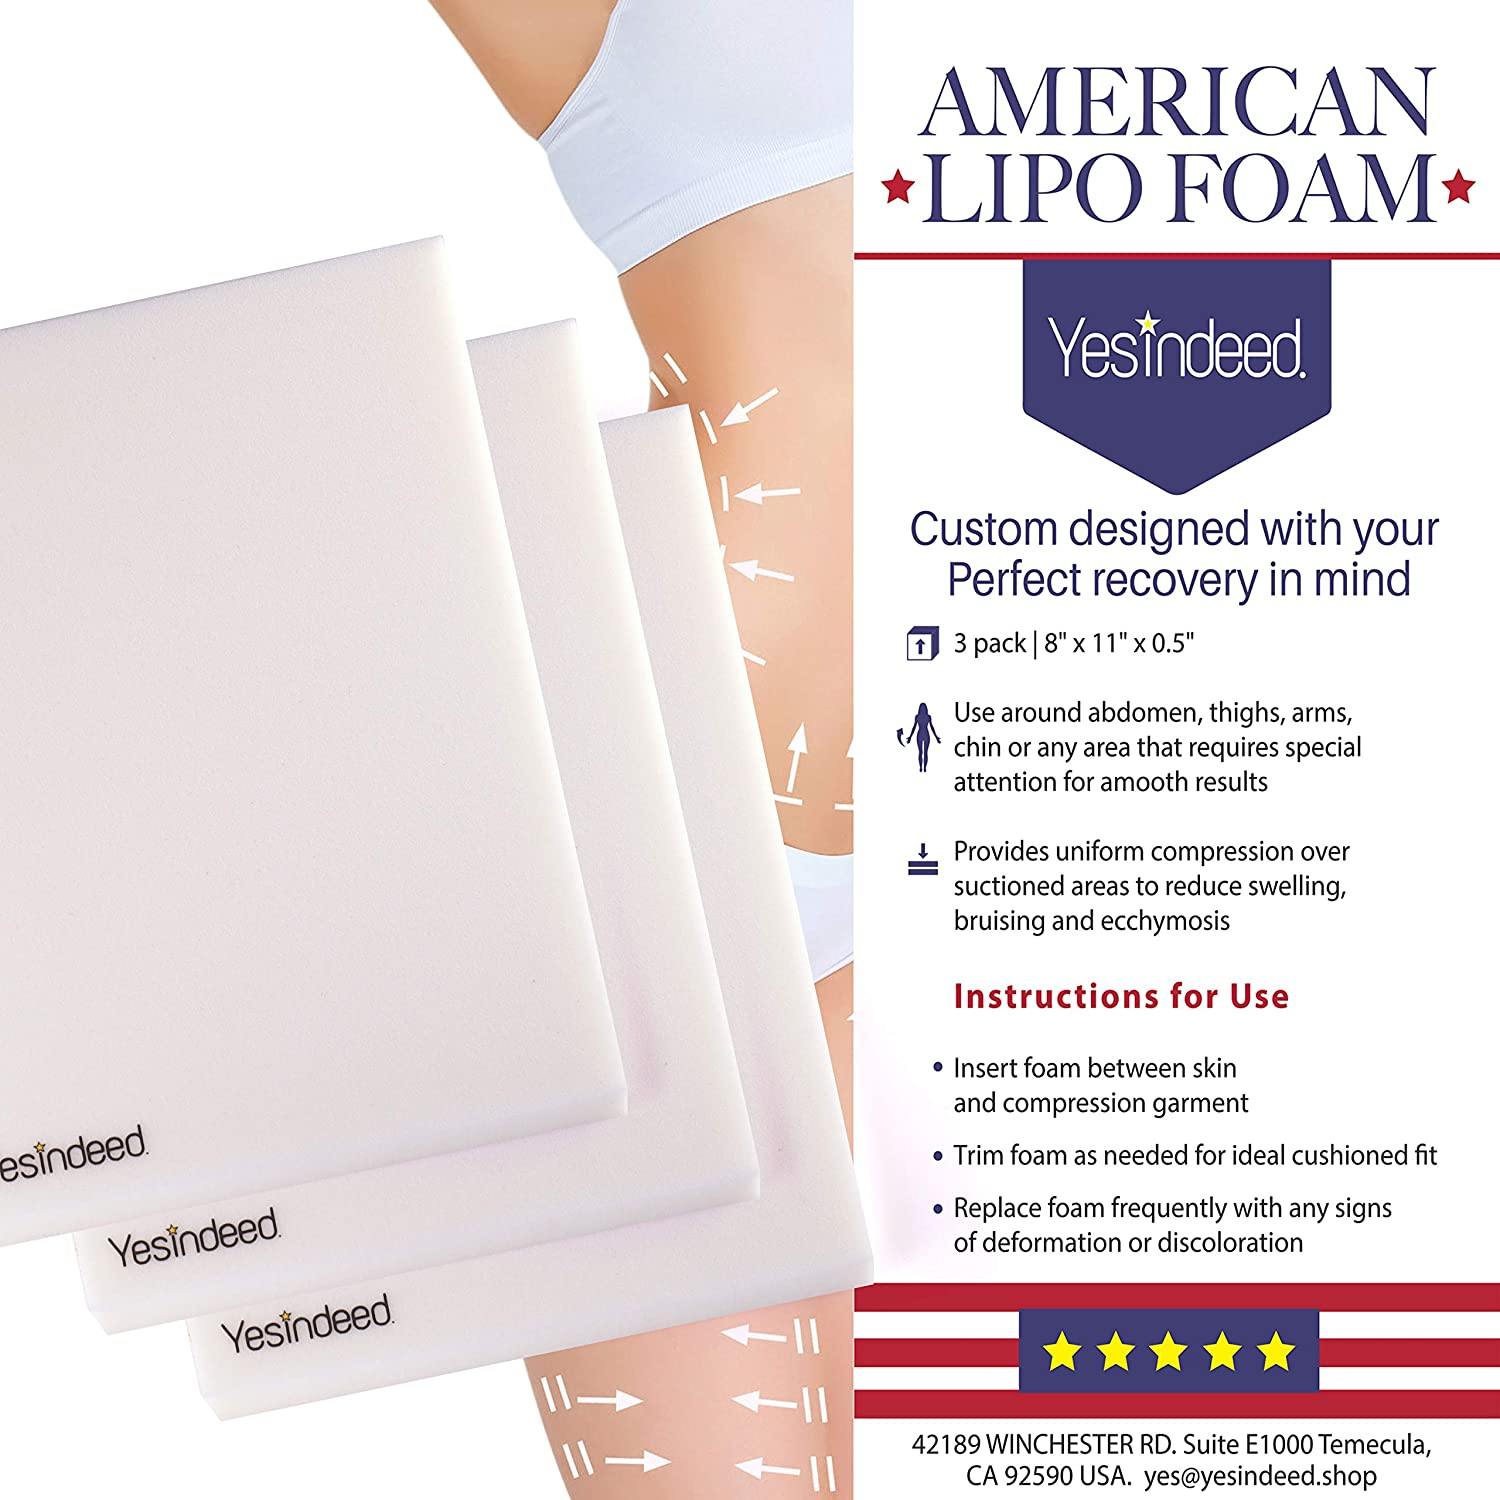 Envi Essentials Lipo Foam | Latex Free Polyurethane Sheets - 11 x 8 x  1/2 Thick | Made in The USA | Recovery Foam for Use After Liposuction,  Tummy